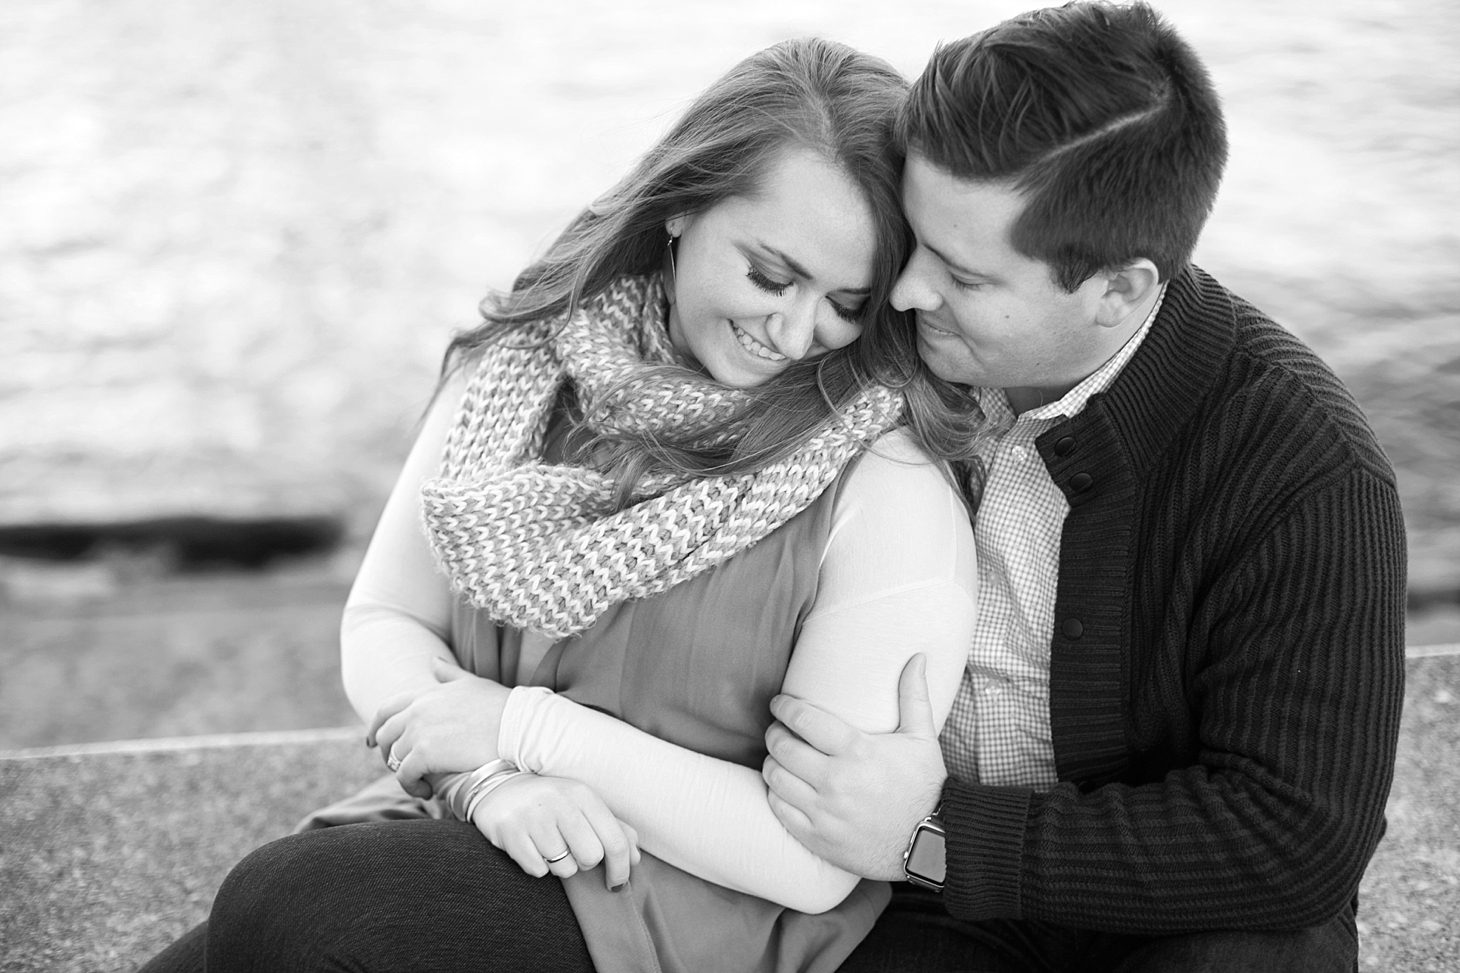 olive-park-engagement-photos-by-christy-tyler-photography_0017